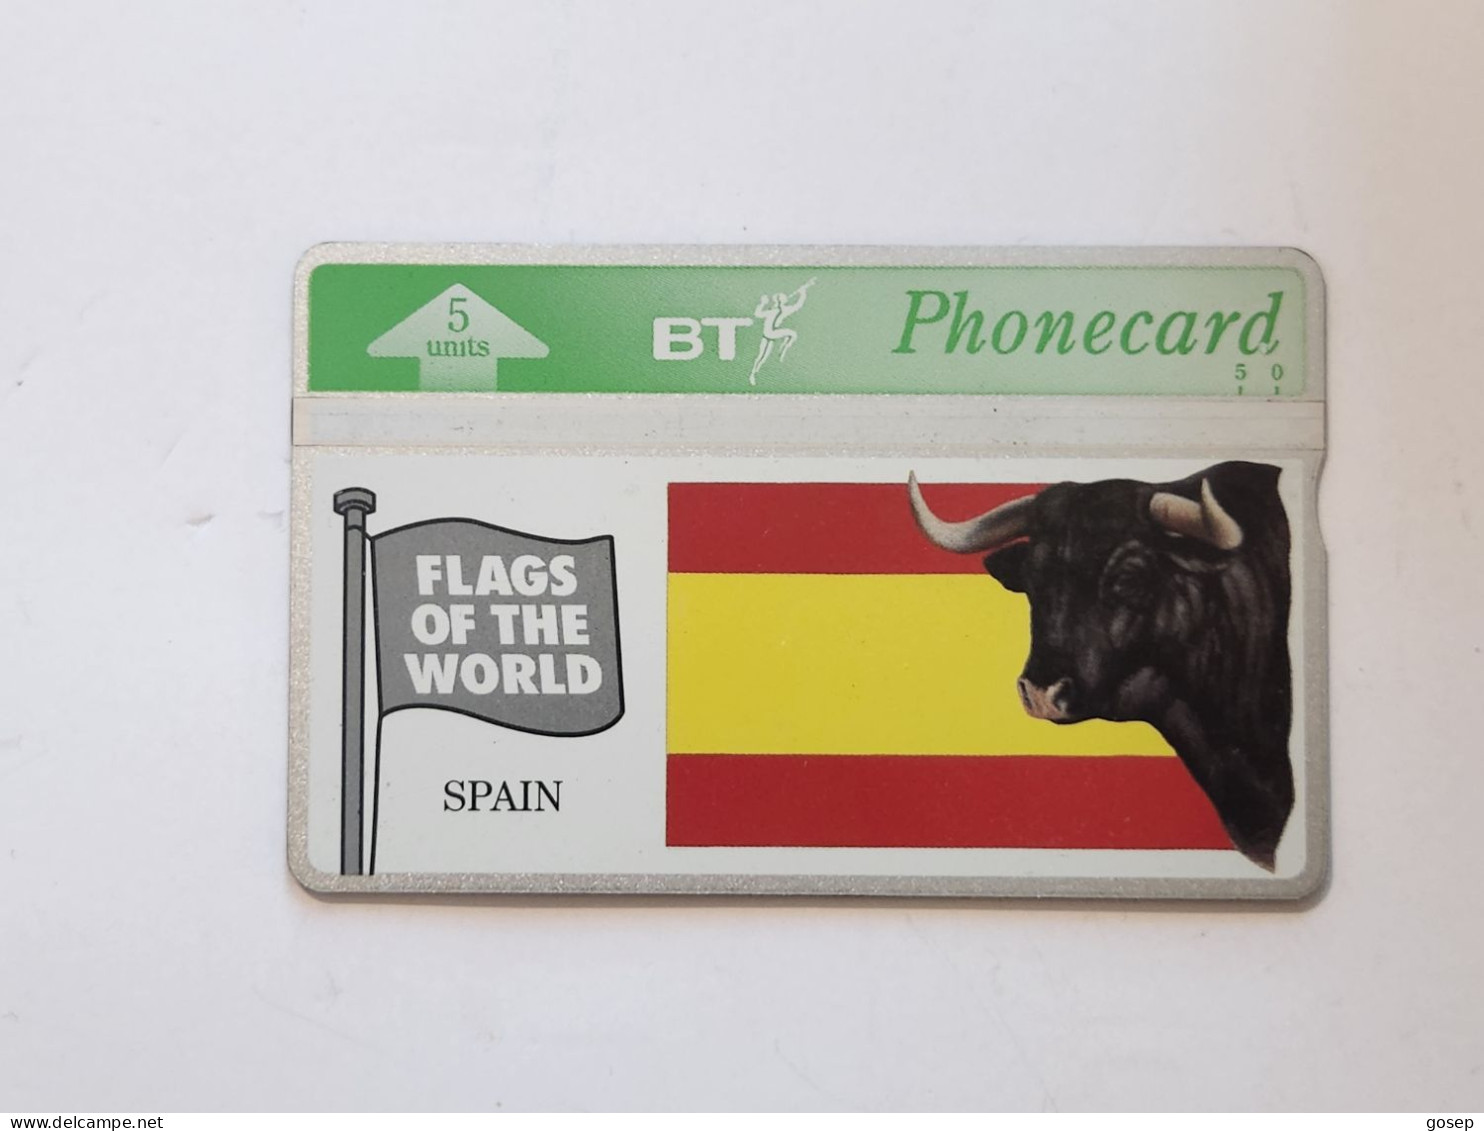 United Kingdom-(BTG-333)-Flags Of The World-(2)-(305)(5units)(407A02293)(tirage-1.000)-price Cataloge-4.00£-mint - BT Edición General